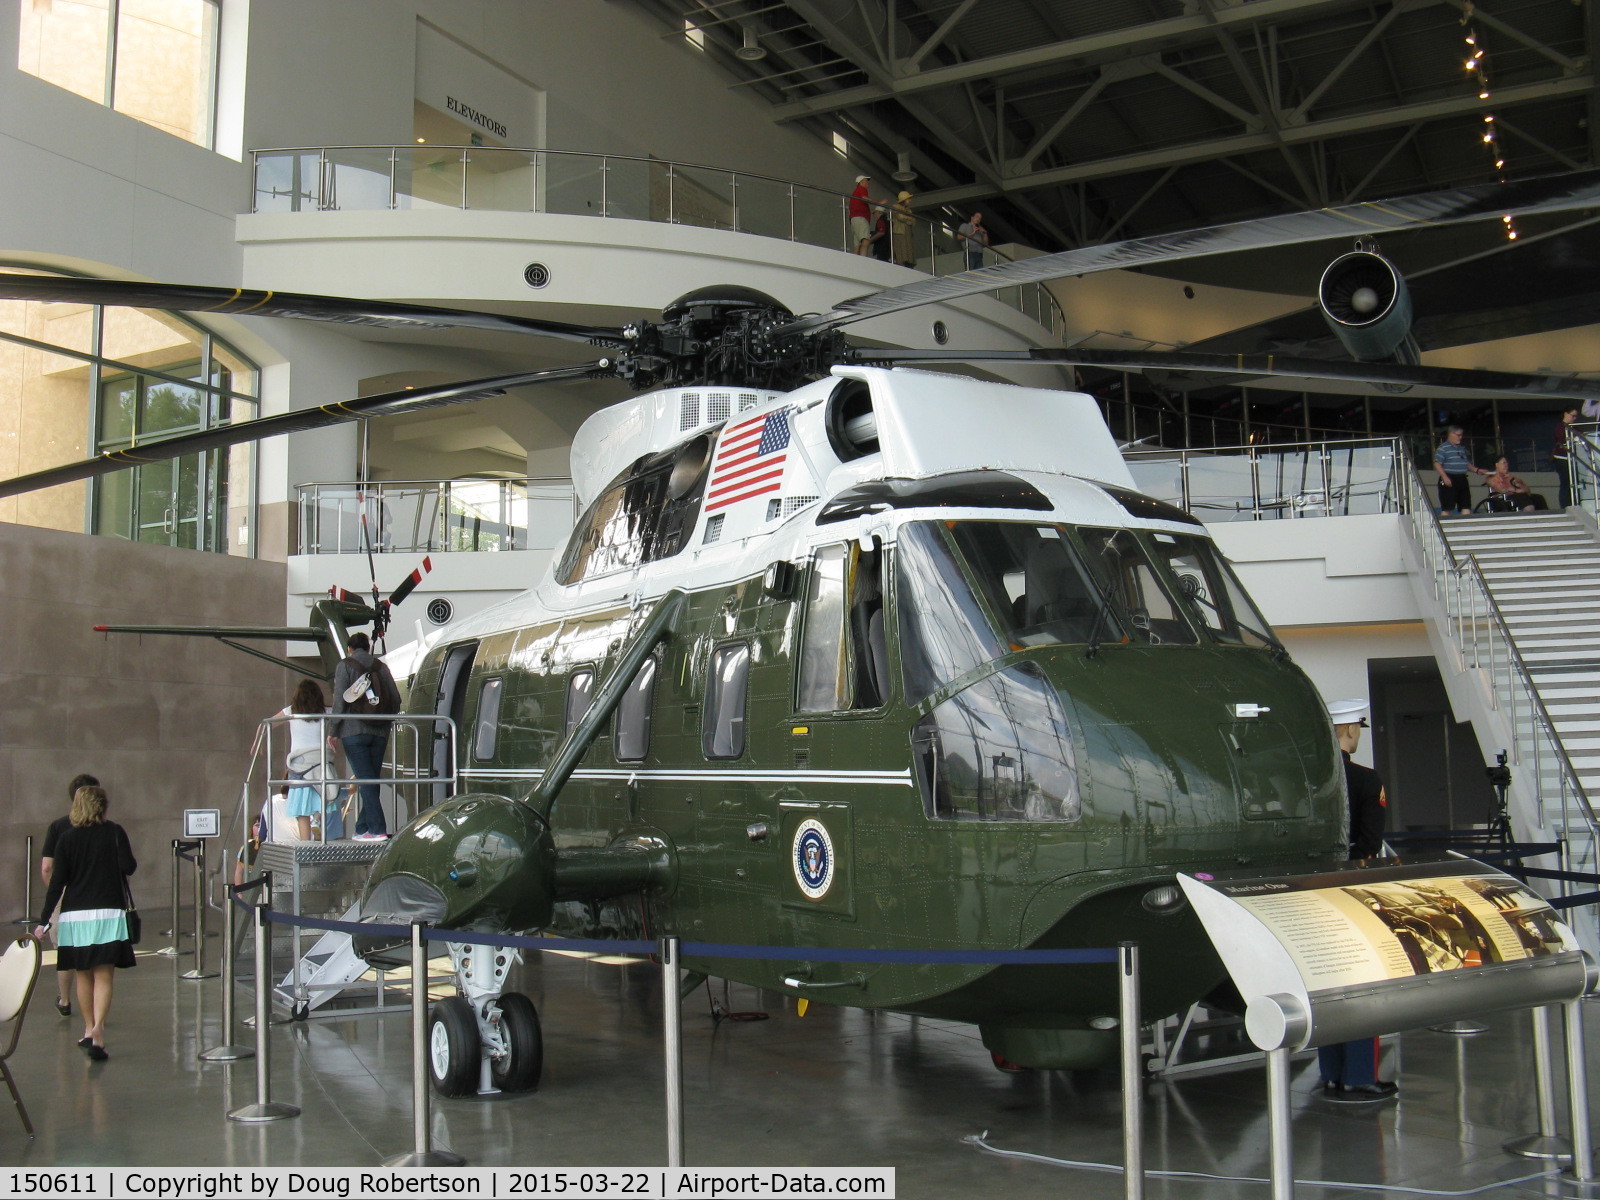 150611, 1961 Sikorsky VH-3A C/N 61-093, 1961 Sikorsky VH-3A MARINE ONE, two General Electric T58-GE-10 Turboshafts 1,400 shp each. Frontal quarter view. At Ronald Reagan Presidential Library and Museum.